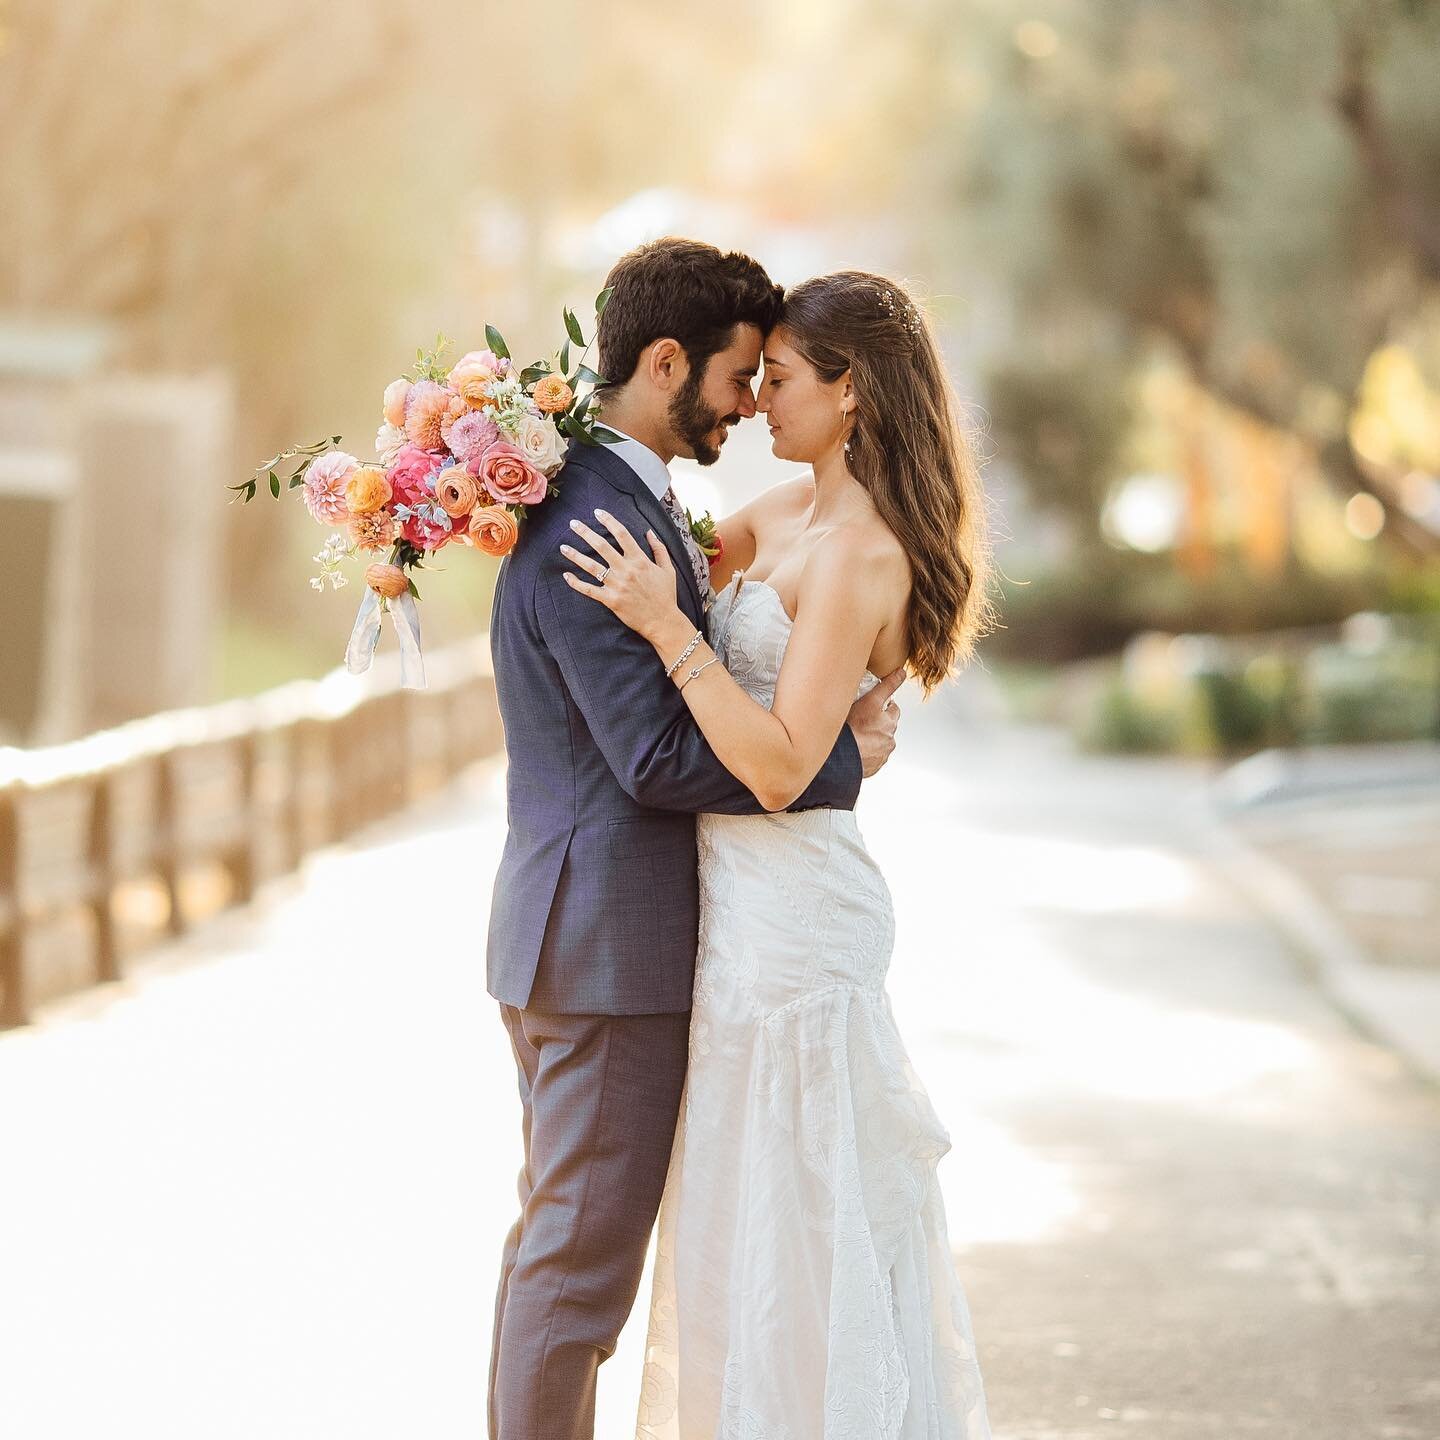 That lighting&hellip;taking in those much needed moments which go by too quickly ✨ 
📷 | @wildwhim 
📋 | @weddingswithangie 
💐 | @_tinyvictories 

#weddingdetails #weddingplanning #santabarbarawedding #zooweddings #weddingswithangie #partialplanning